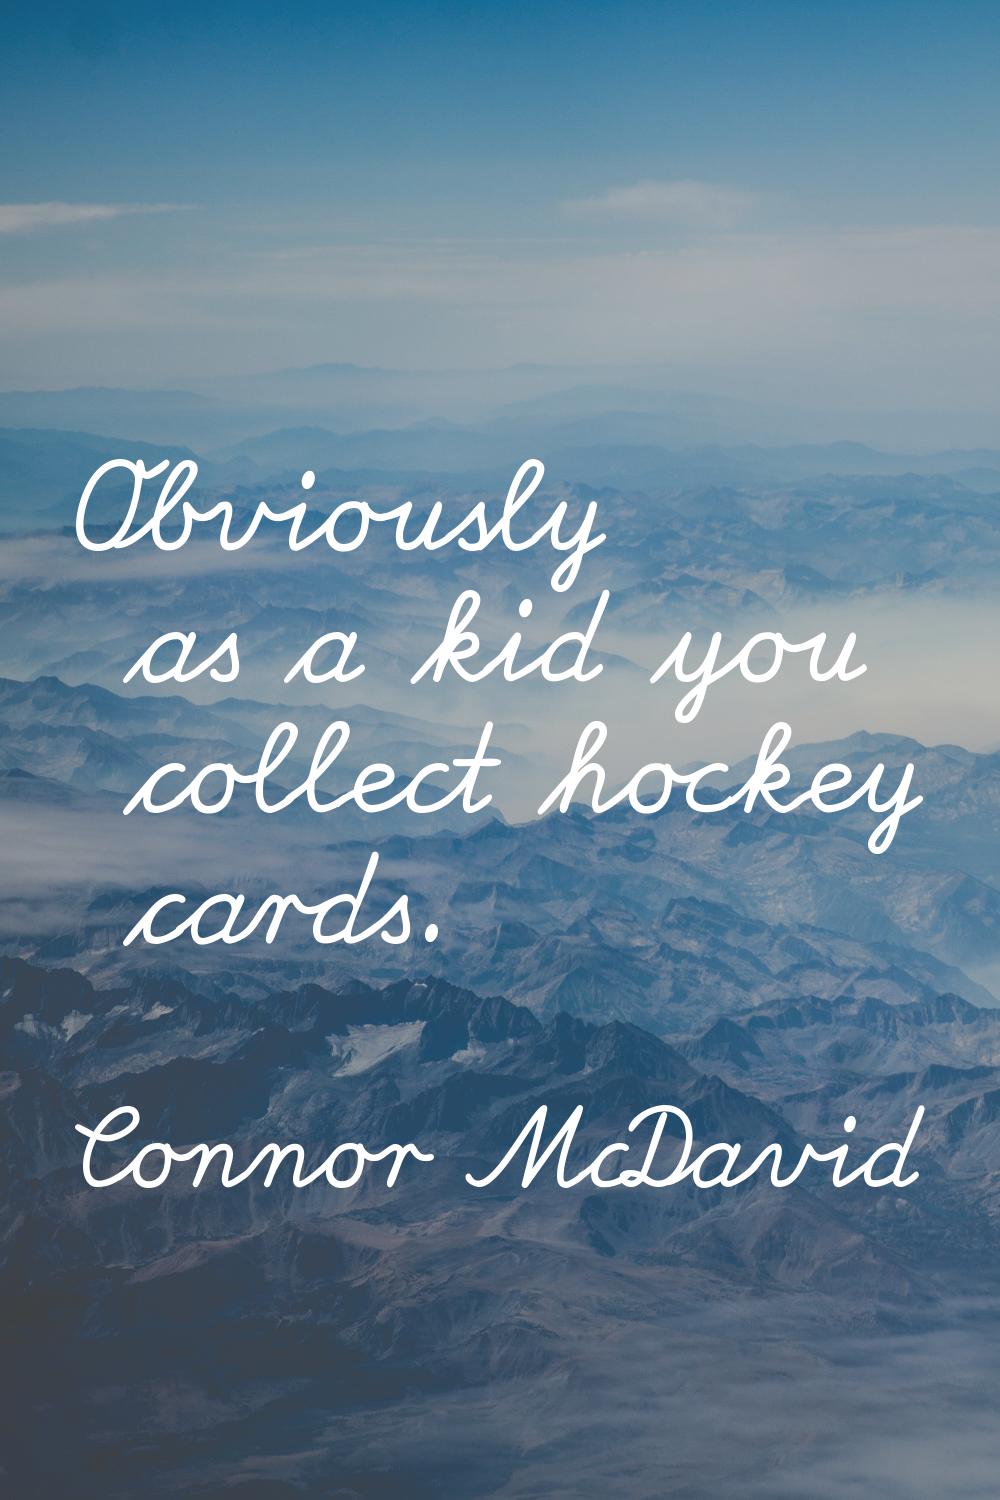 Obviously as a kid you collect hockey cards.